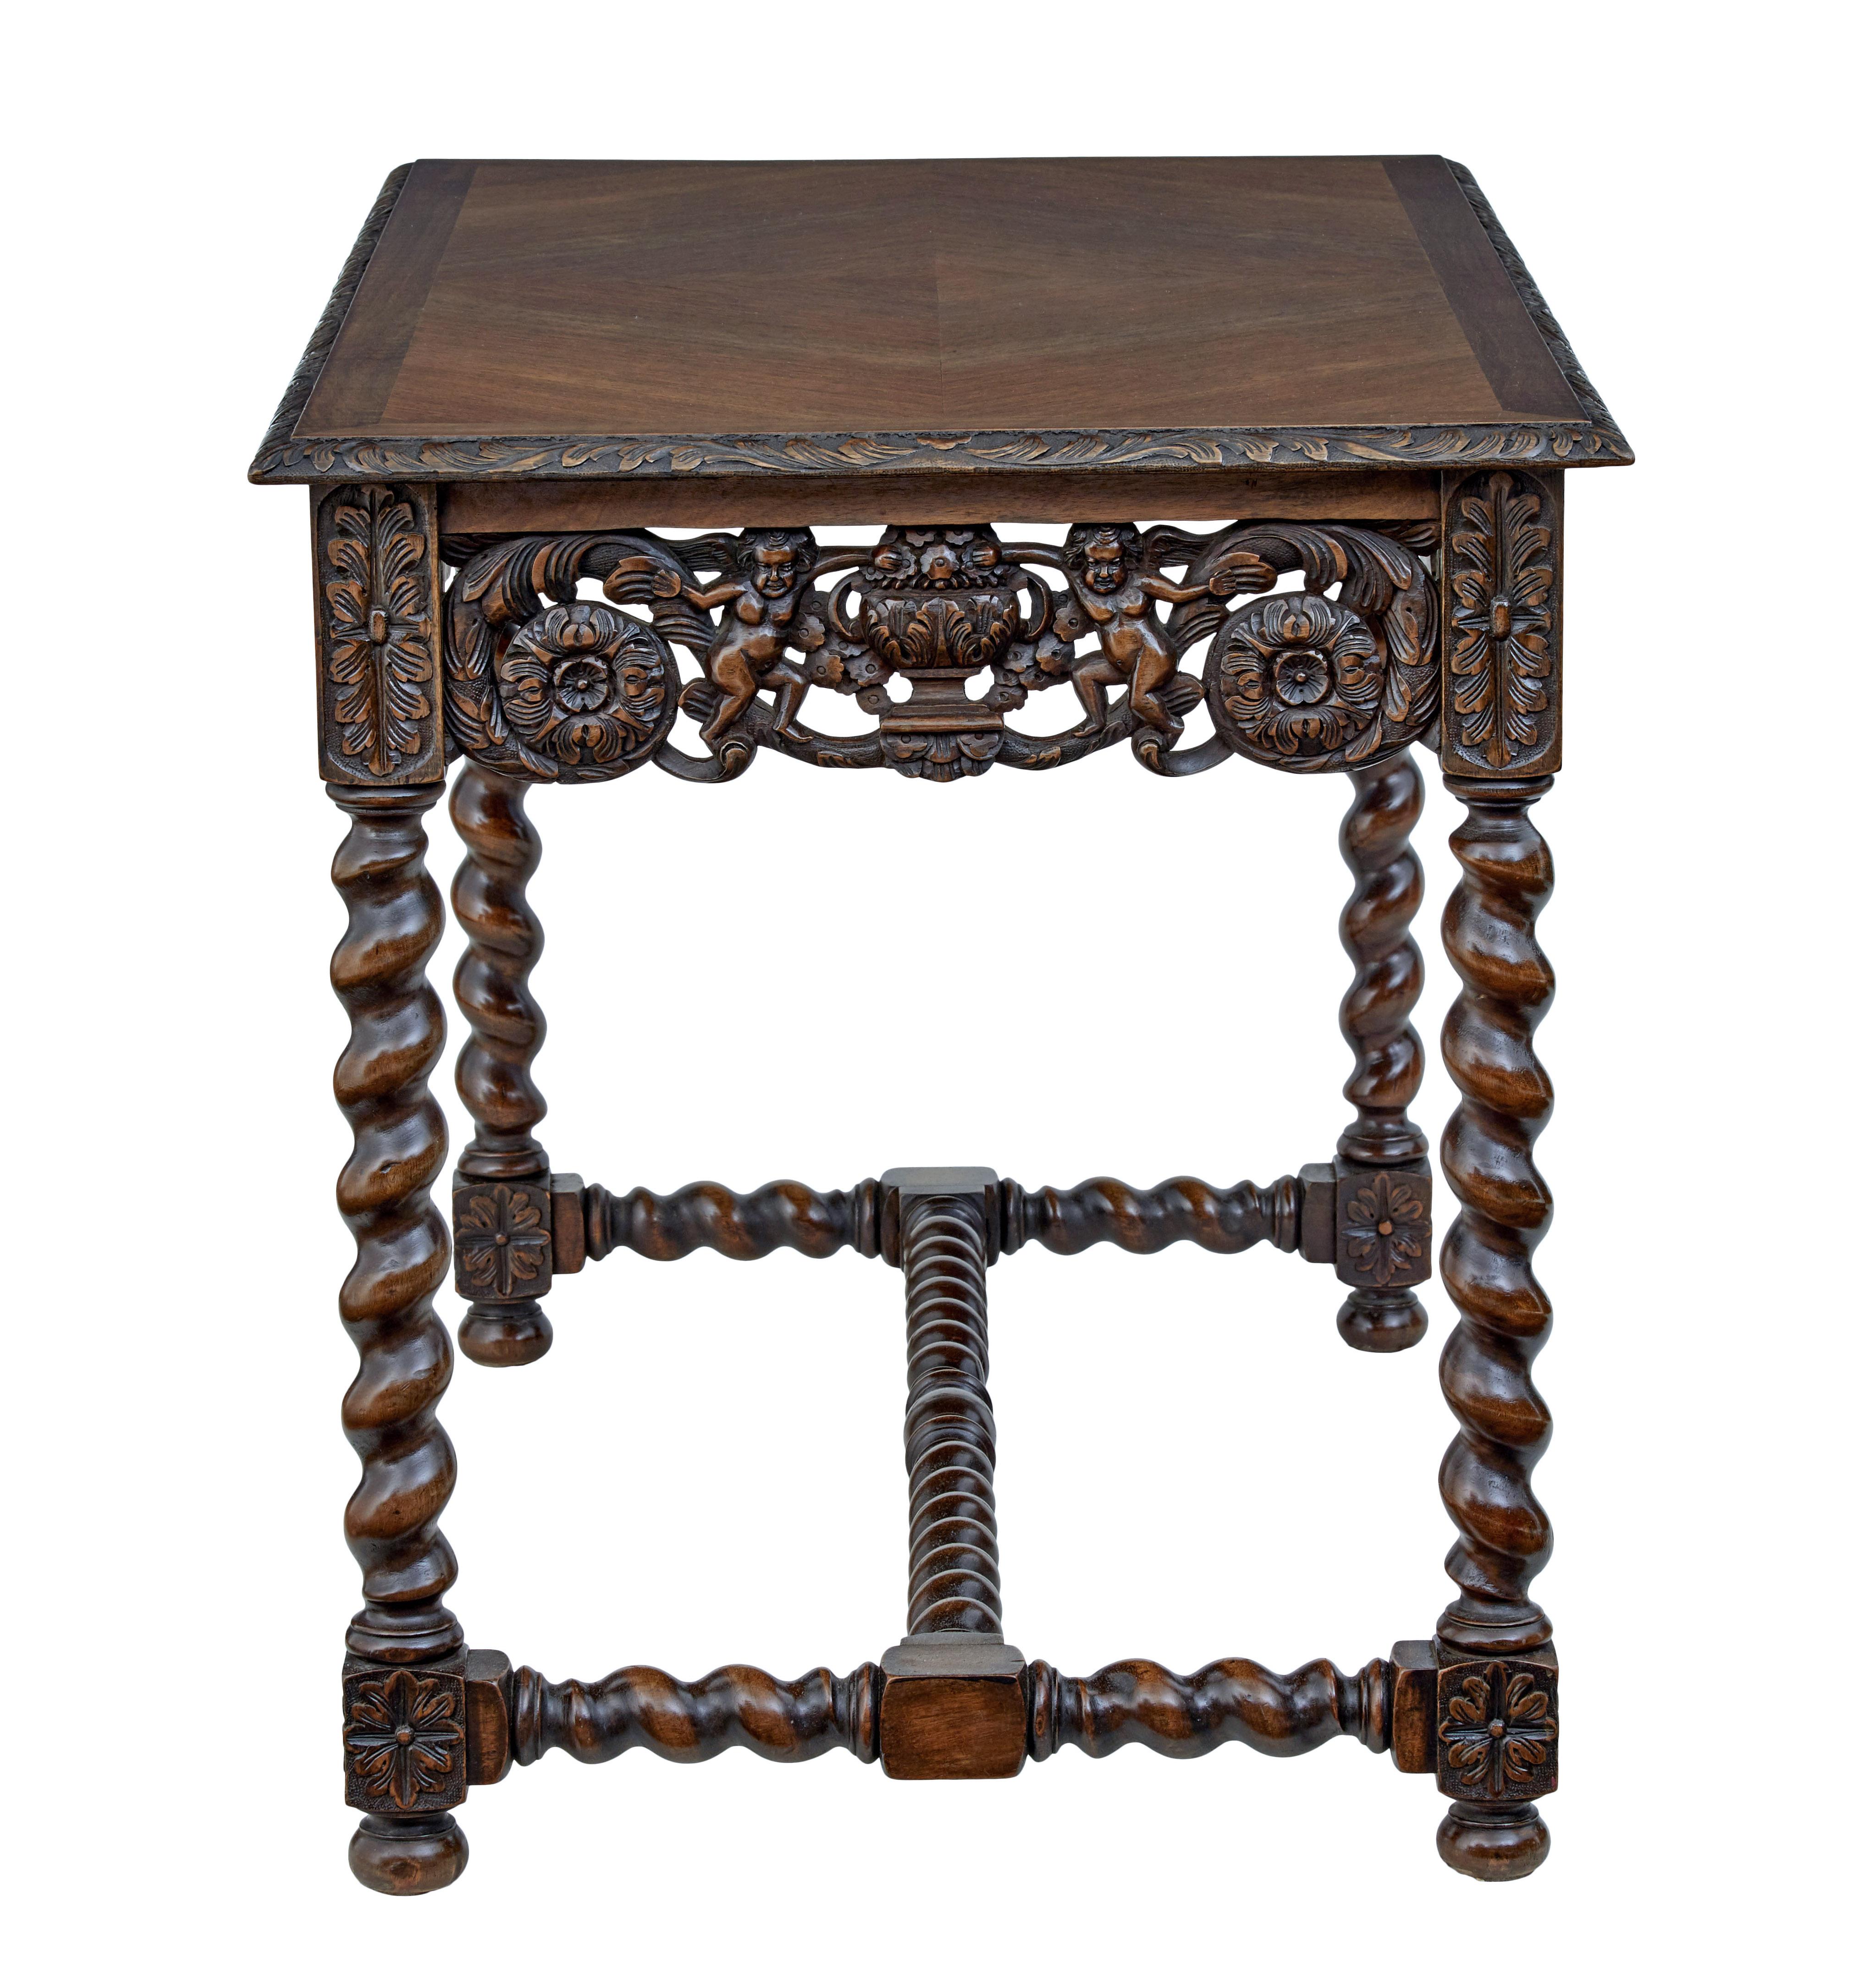 Renaissance Revival Early 20th Century Carved Oak Side Table by Waring & Gillow